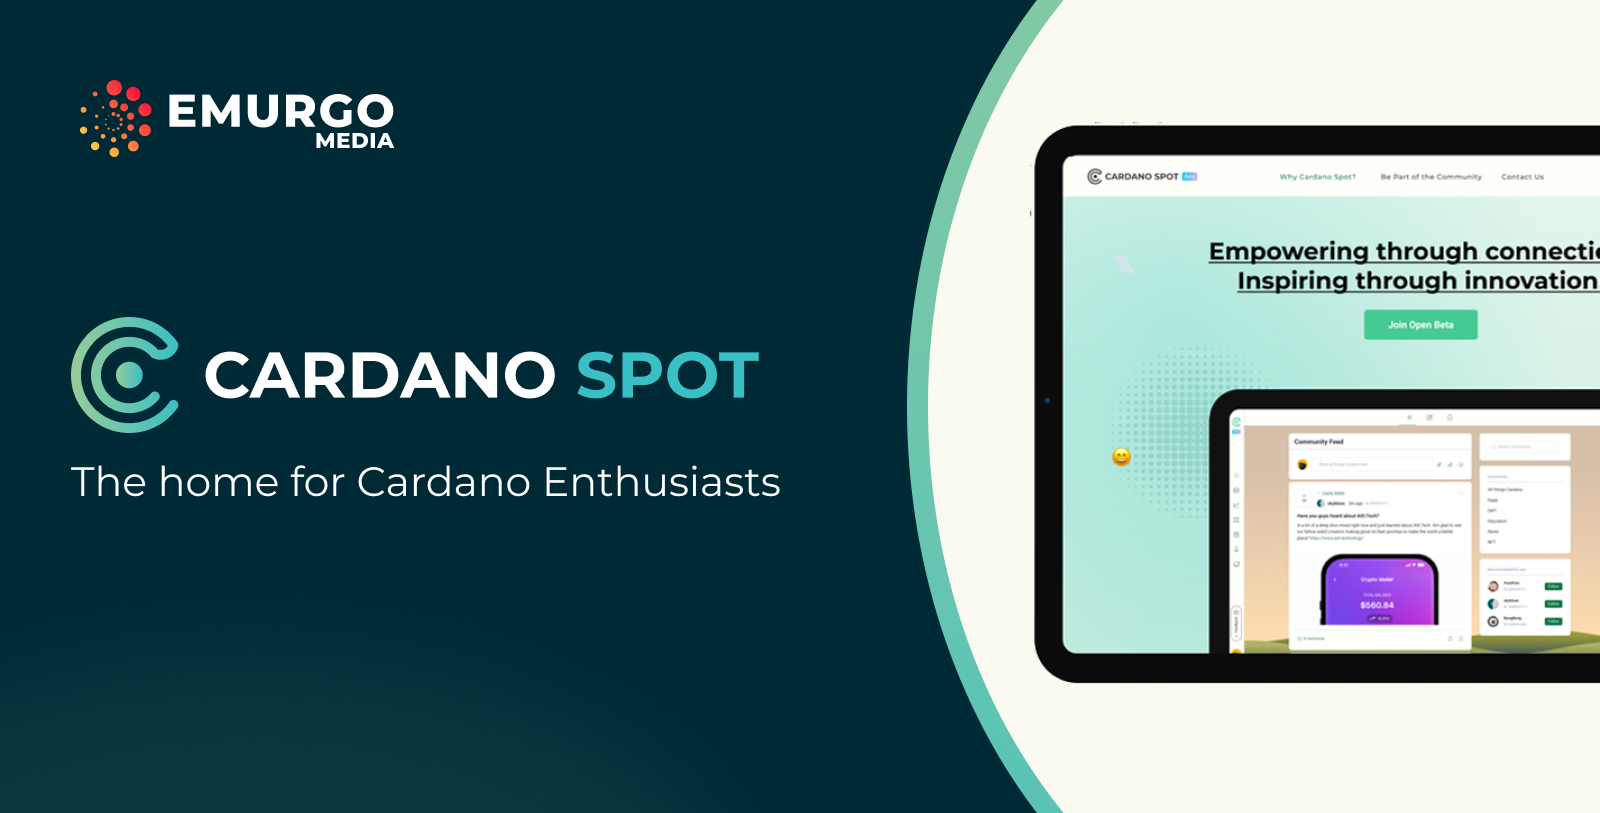 Cardano-Spot-The-home-for-Cardano-Enthusiasts.png